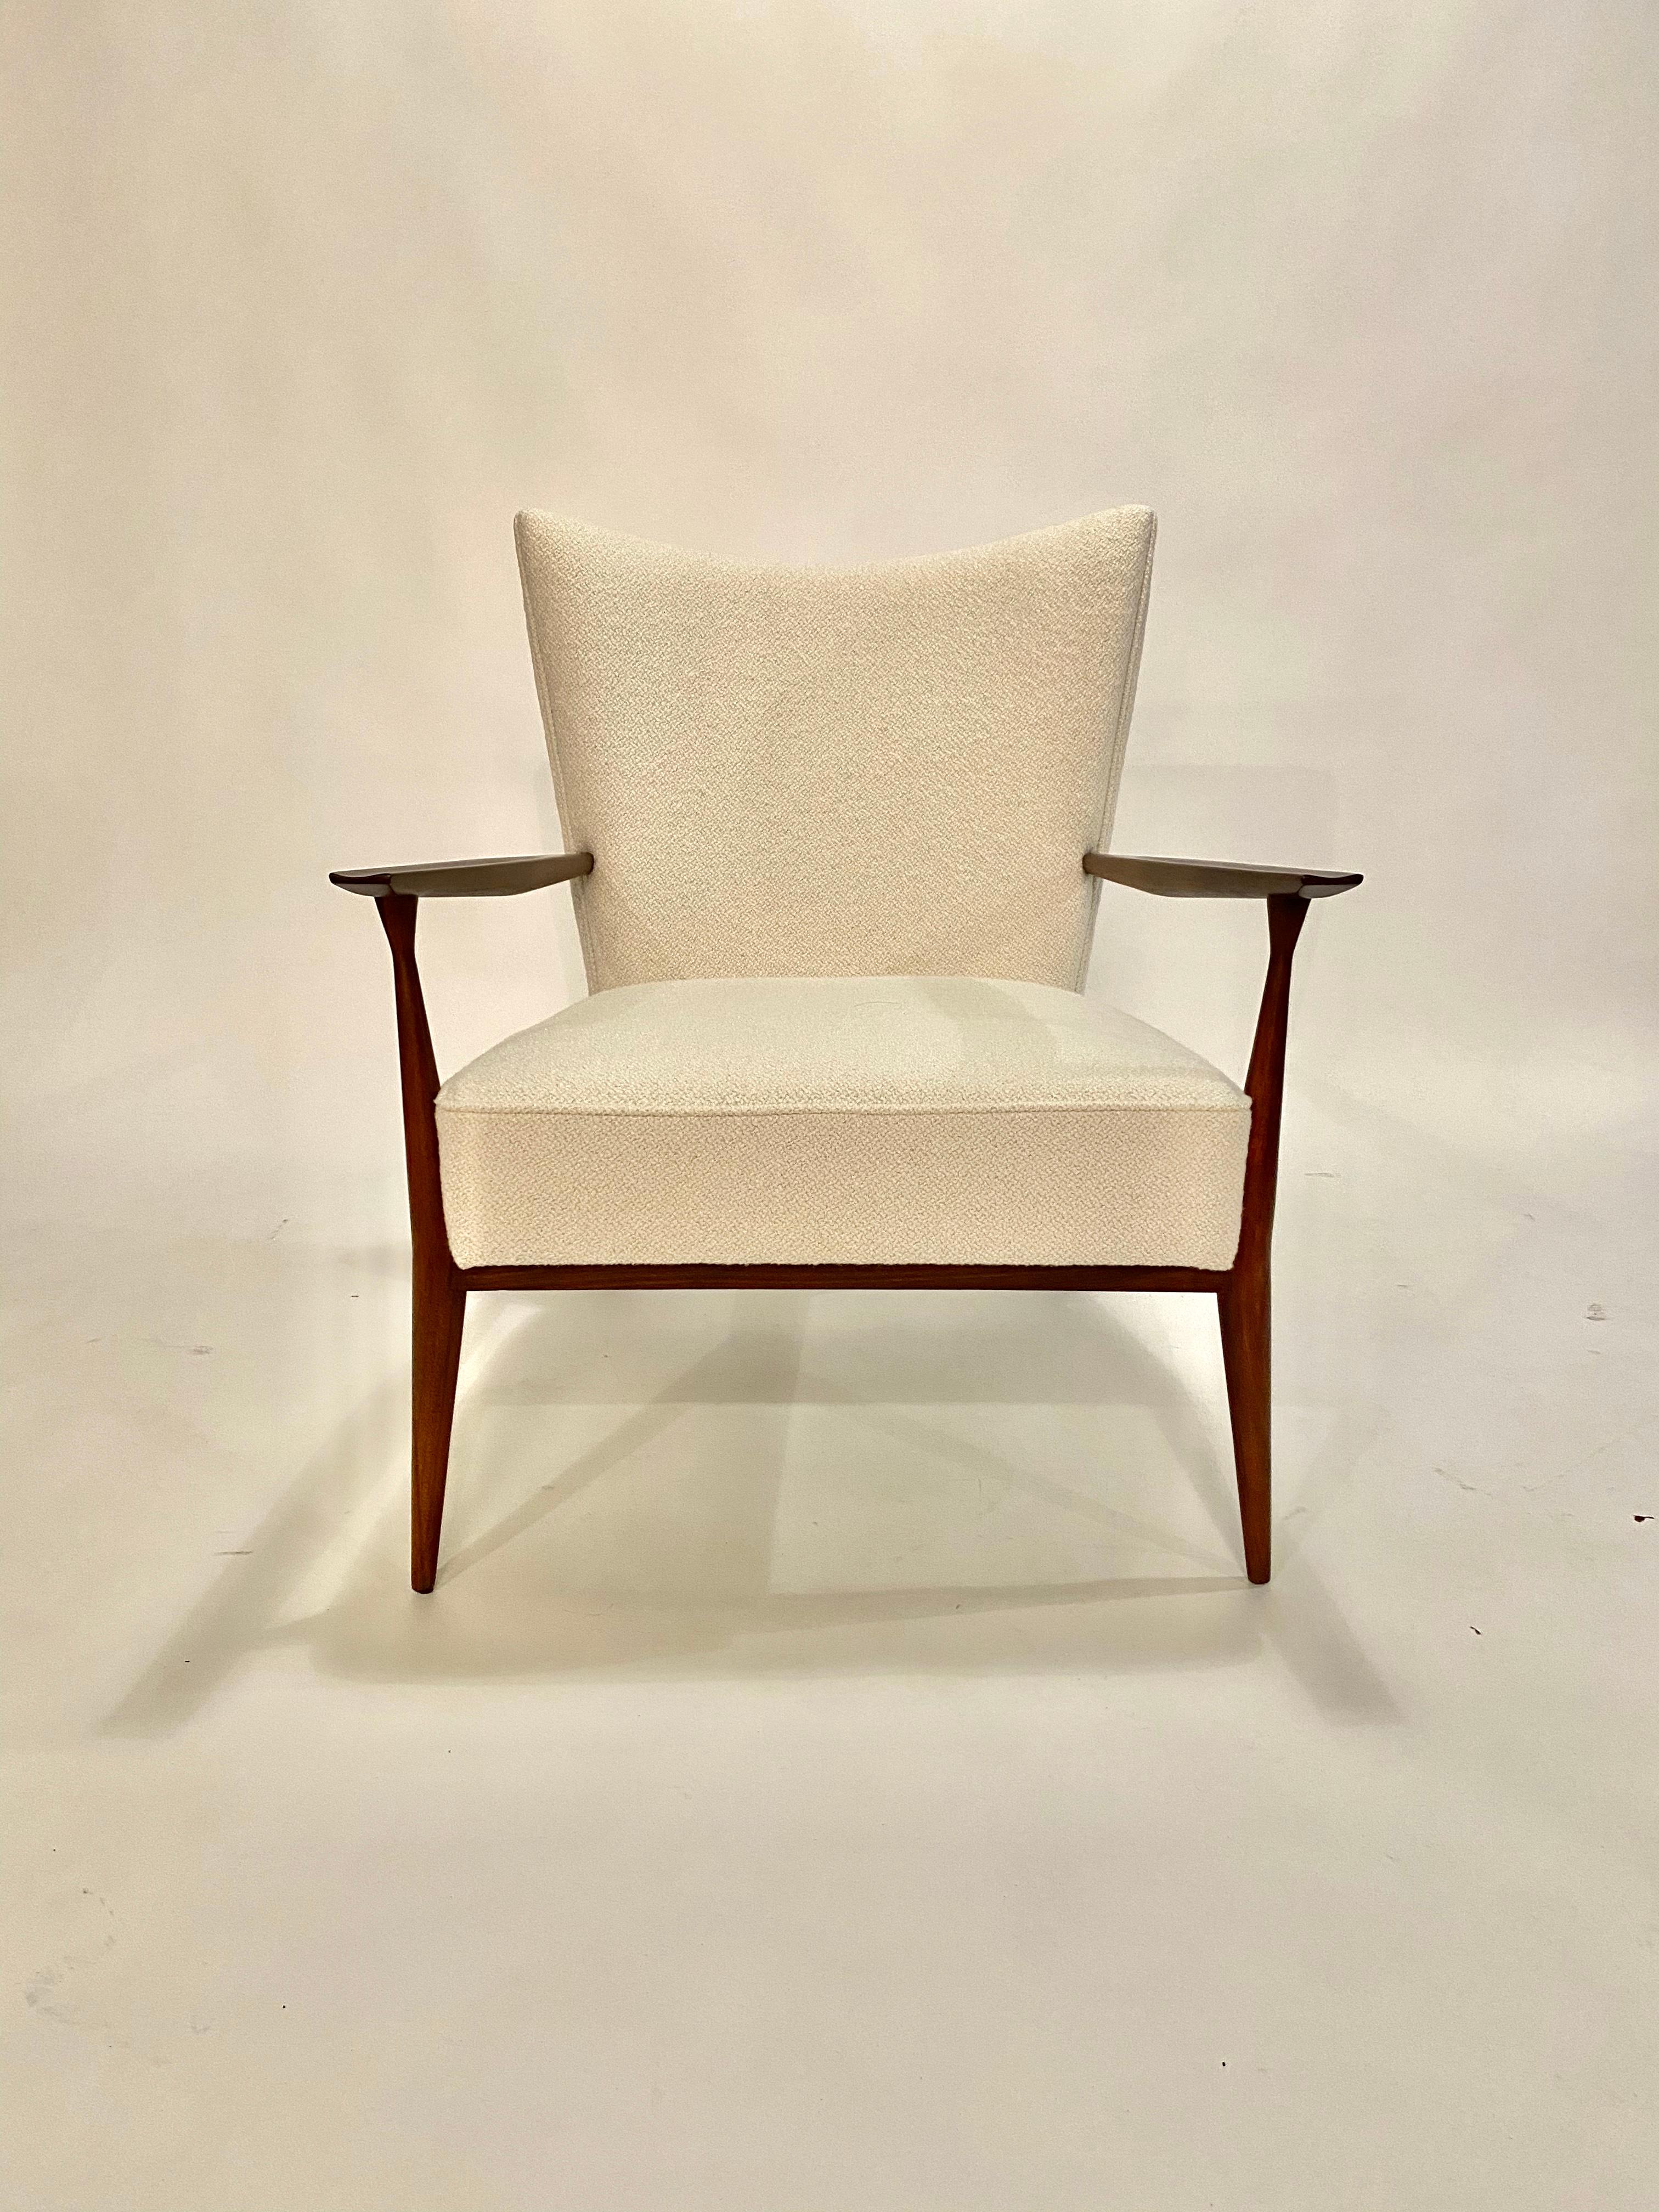 1950s Paul McCobb lounge chair in beautifully restored walnut and reupholstered in an Italian ivory bouclé. This chair is stunning at every angle.